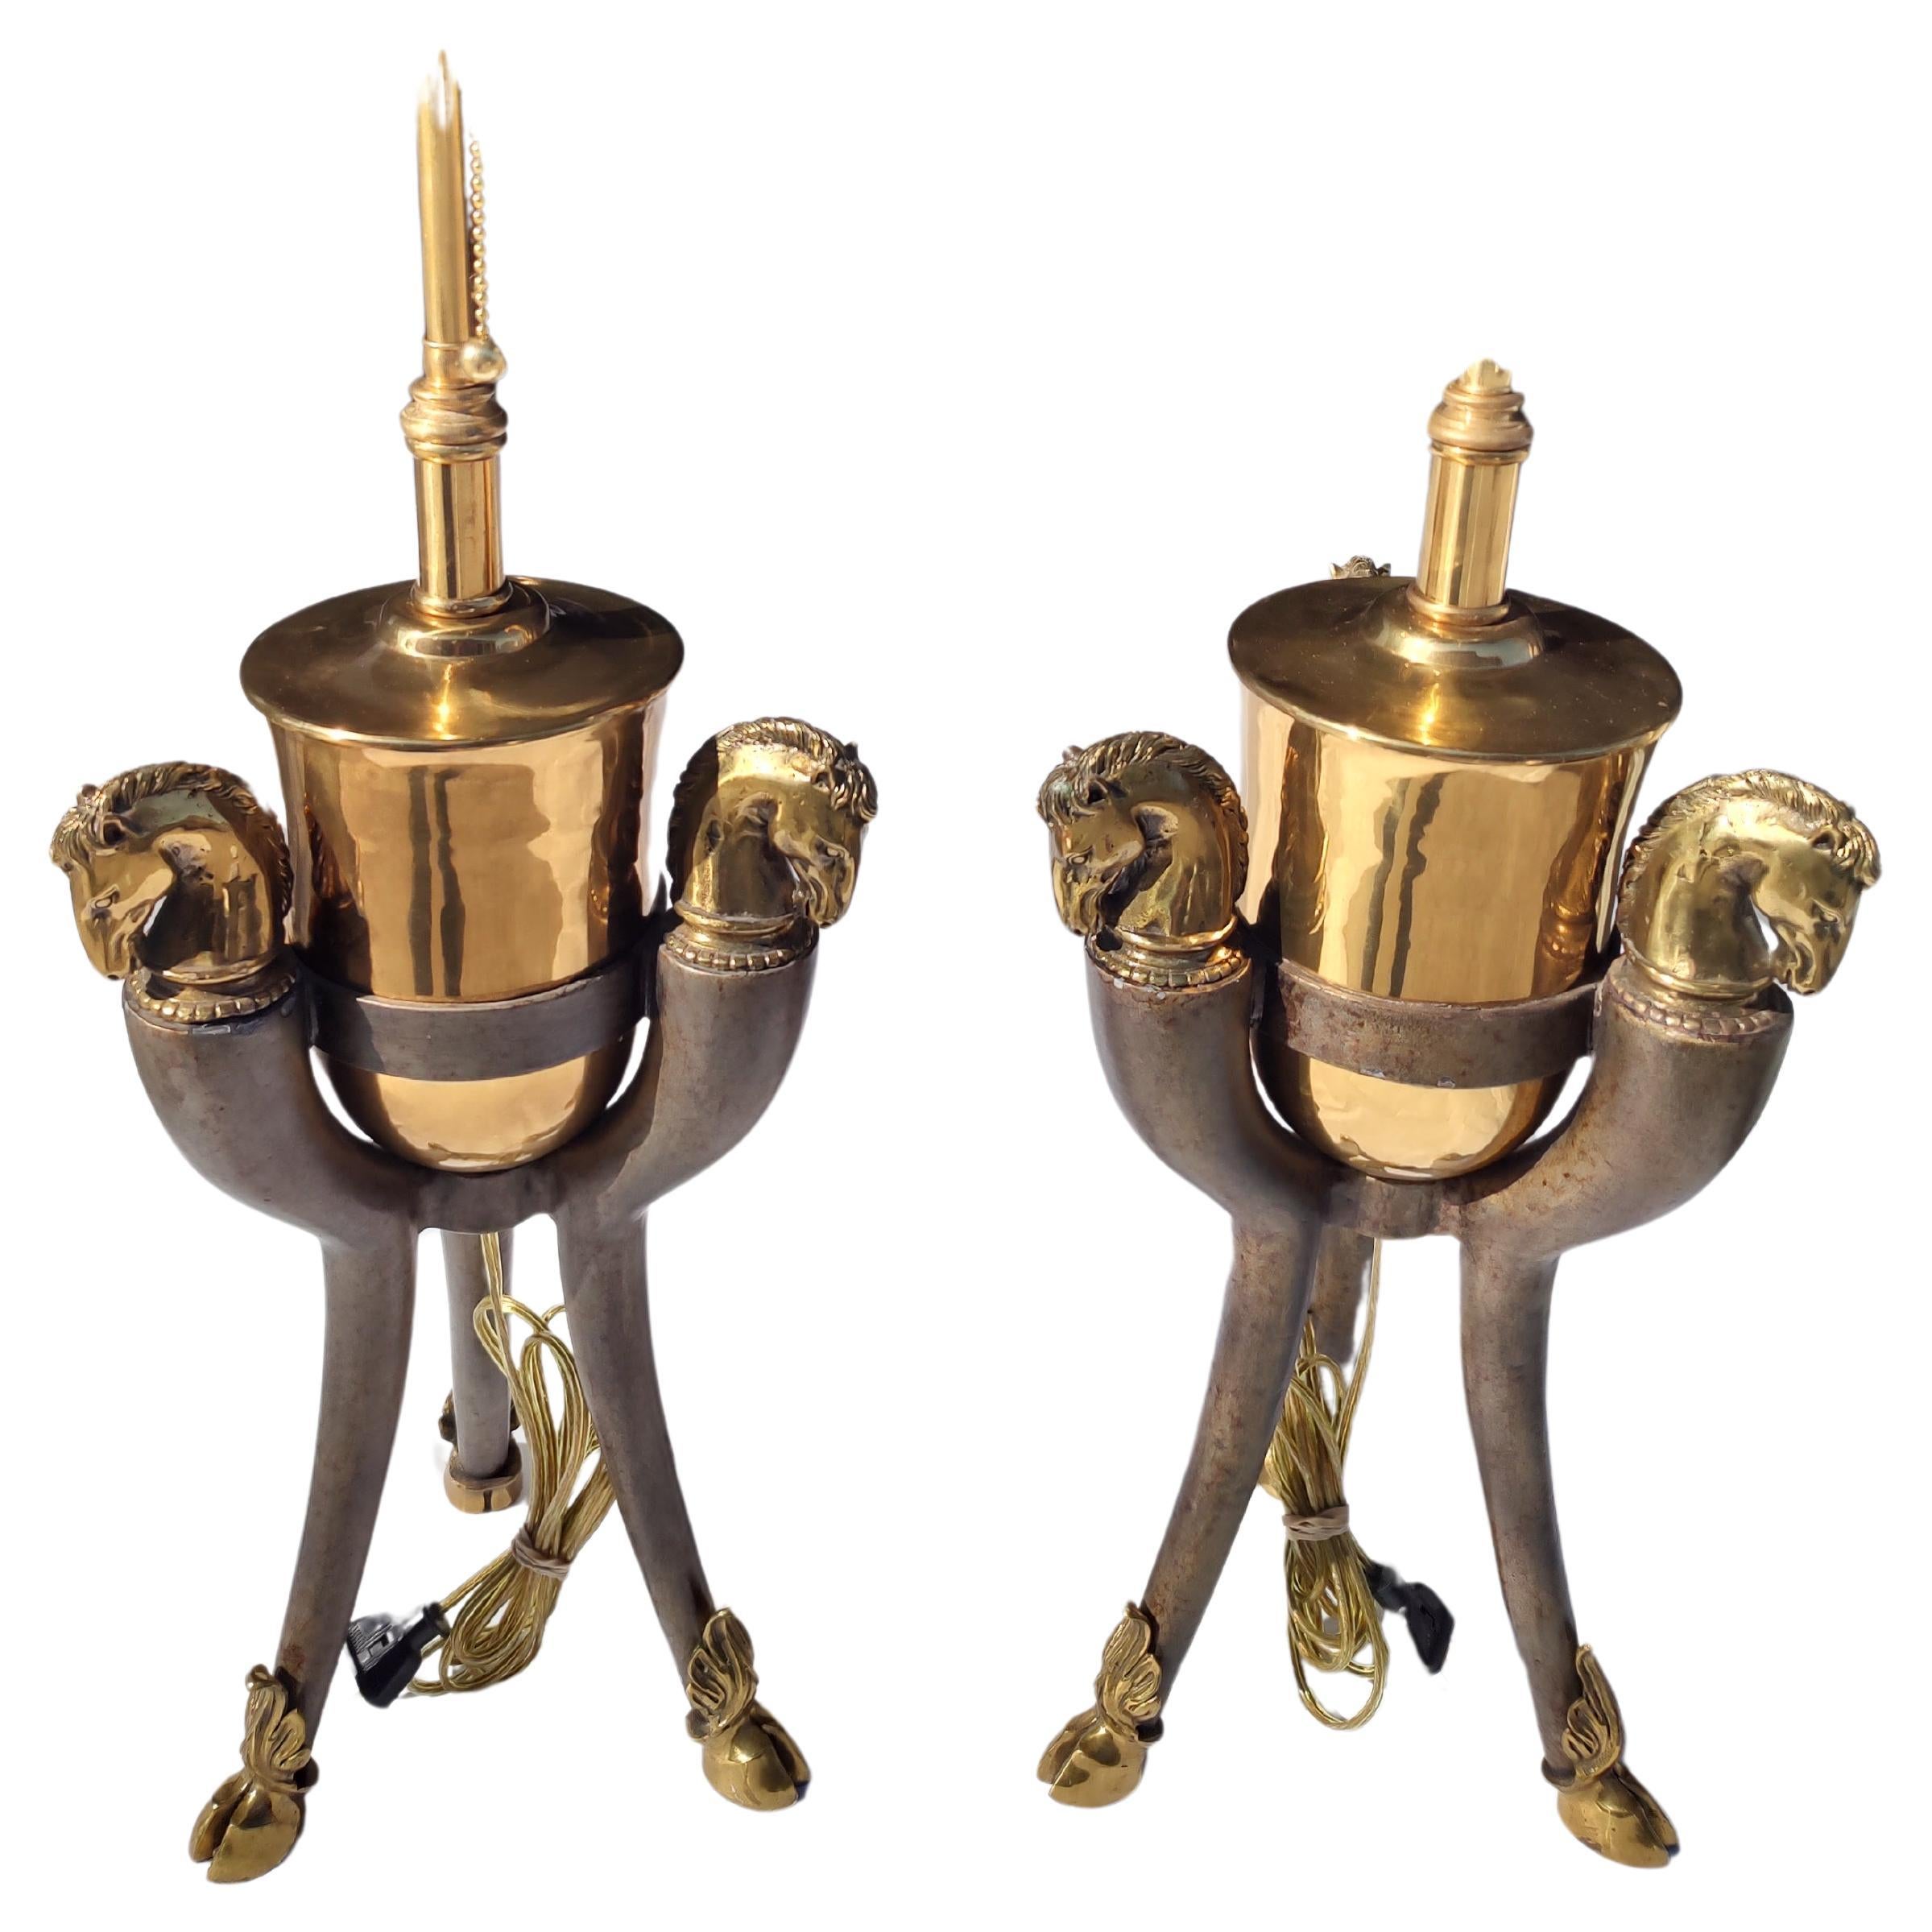 Fabulous pair of table lamps by Maitland Smith. Triangular in style with crisp detailed horse heads and hooves at the base. Legs are patinated bronze.
Totally rewired with fresh hardware and twin sockets on each lamp. One lamp with a partial